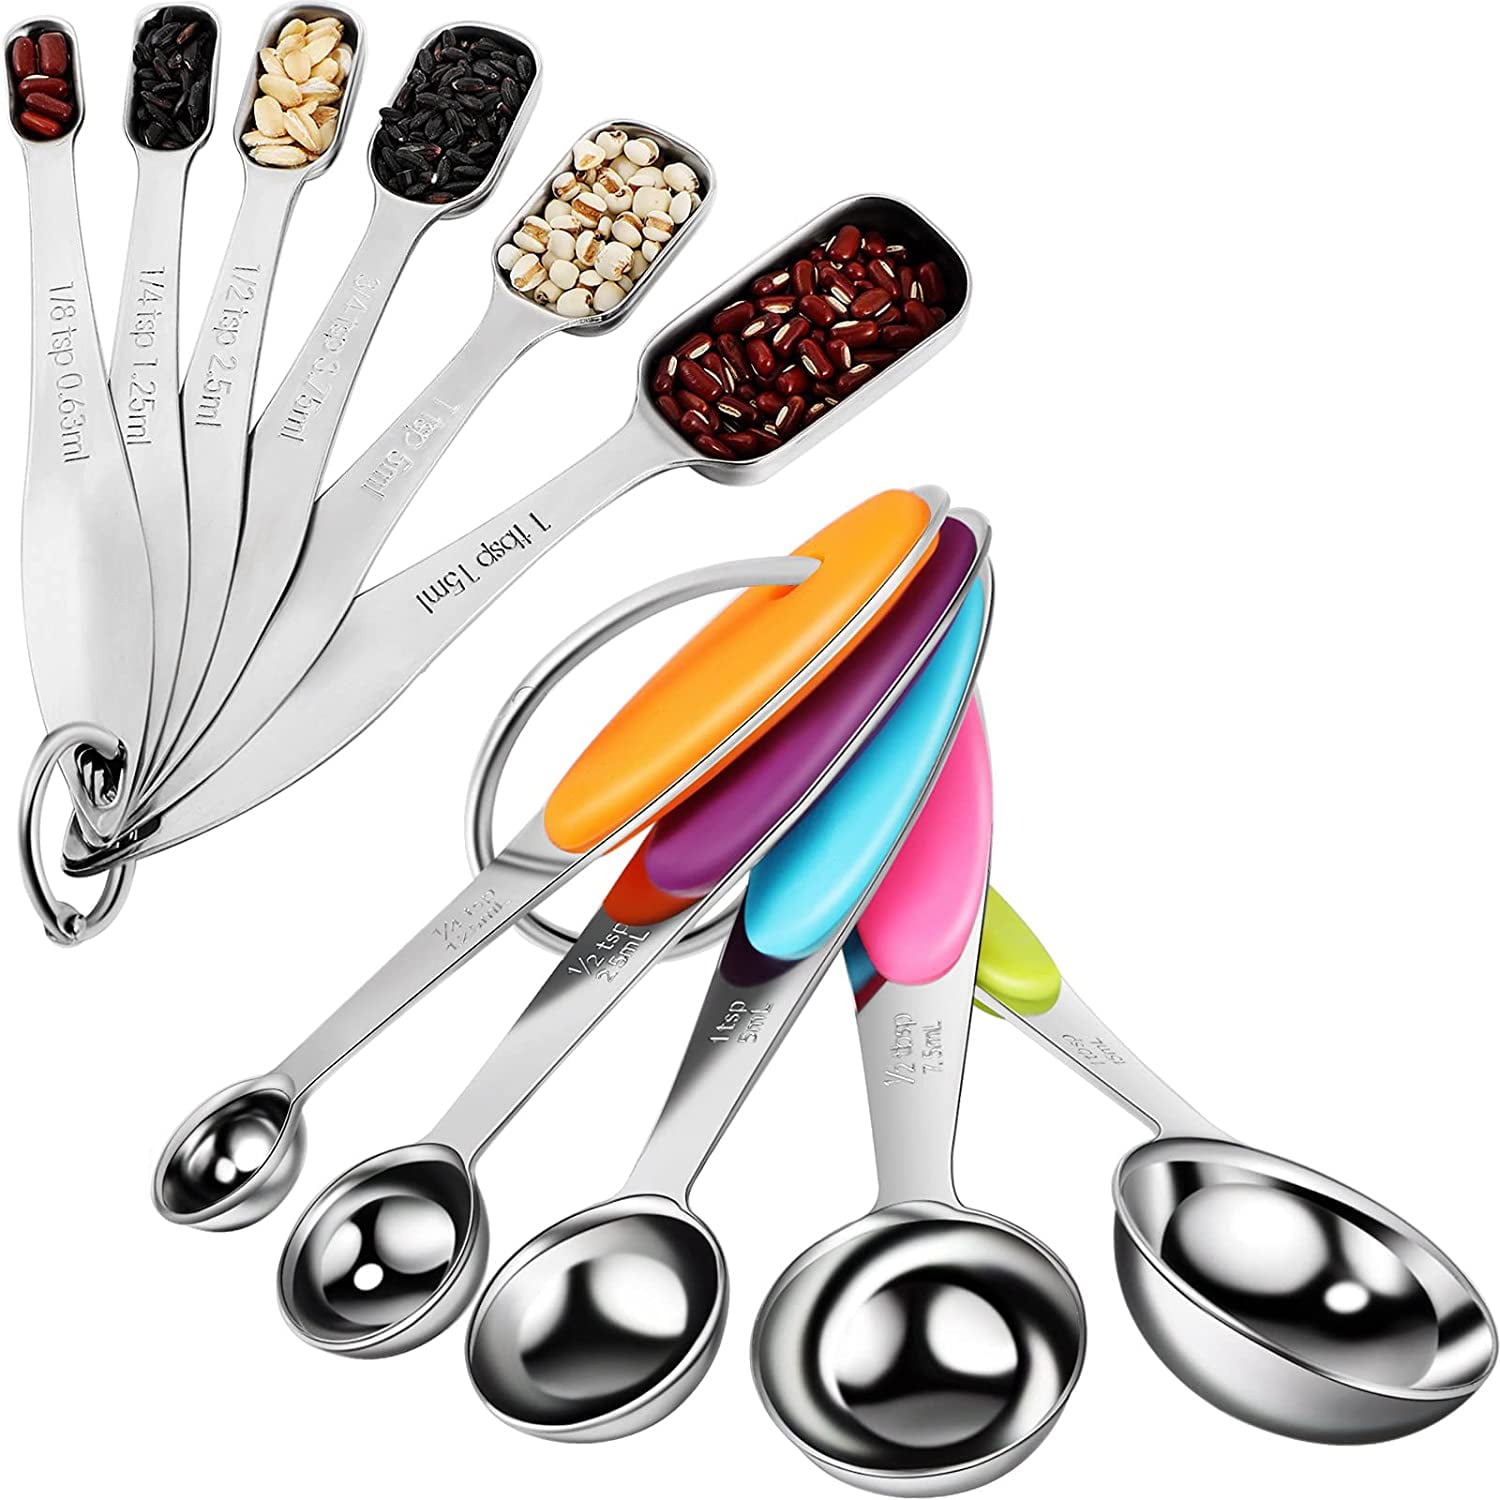 6 Pcs Measuring Cups Spoons Kitchen Baking Cooking Tools Set Stainless Steel 